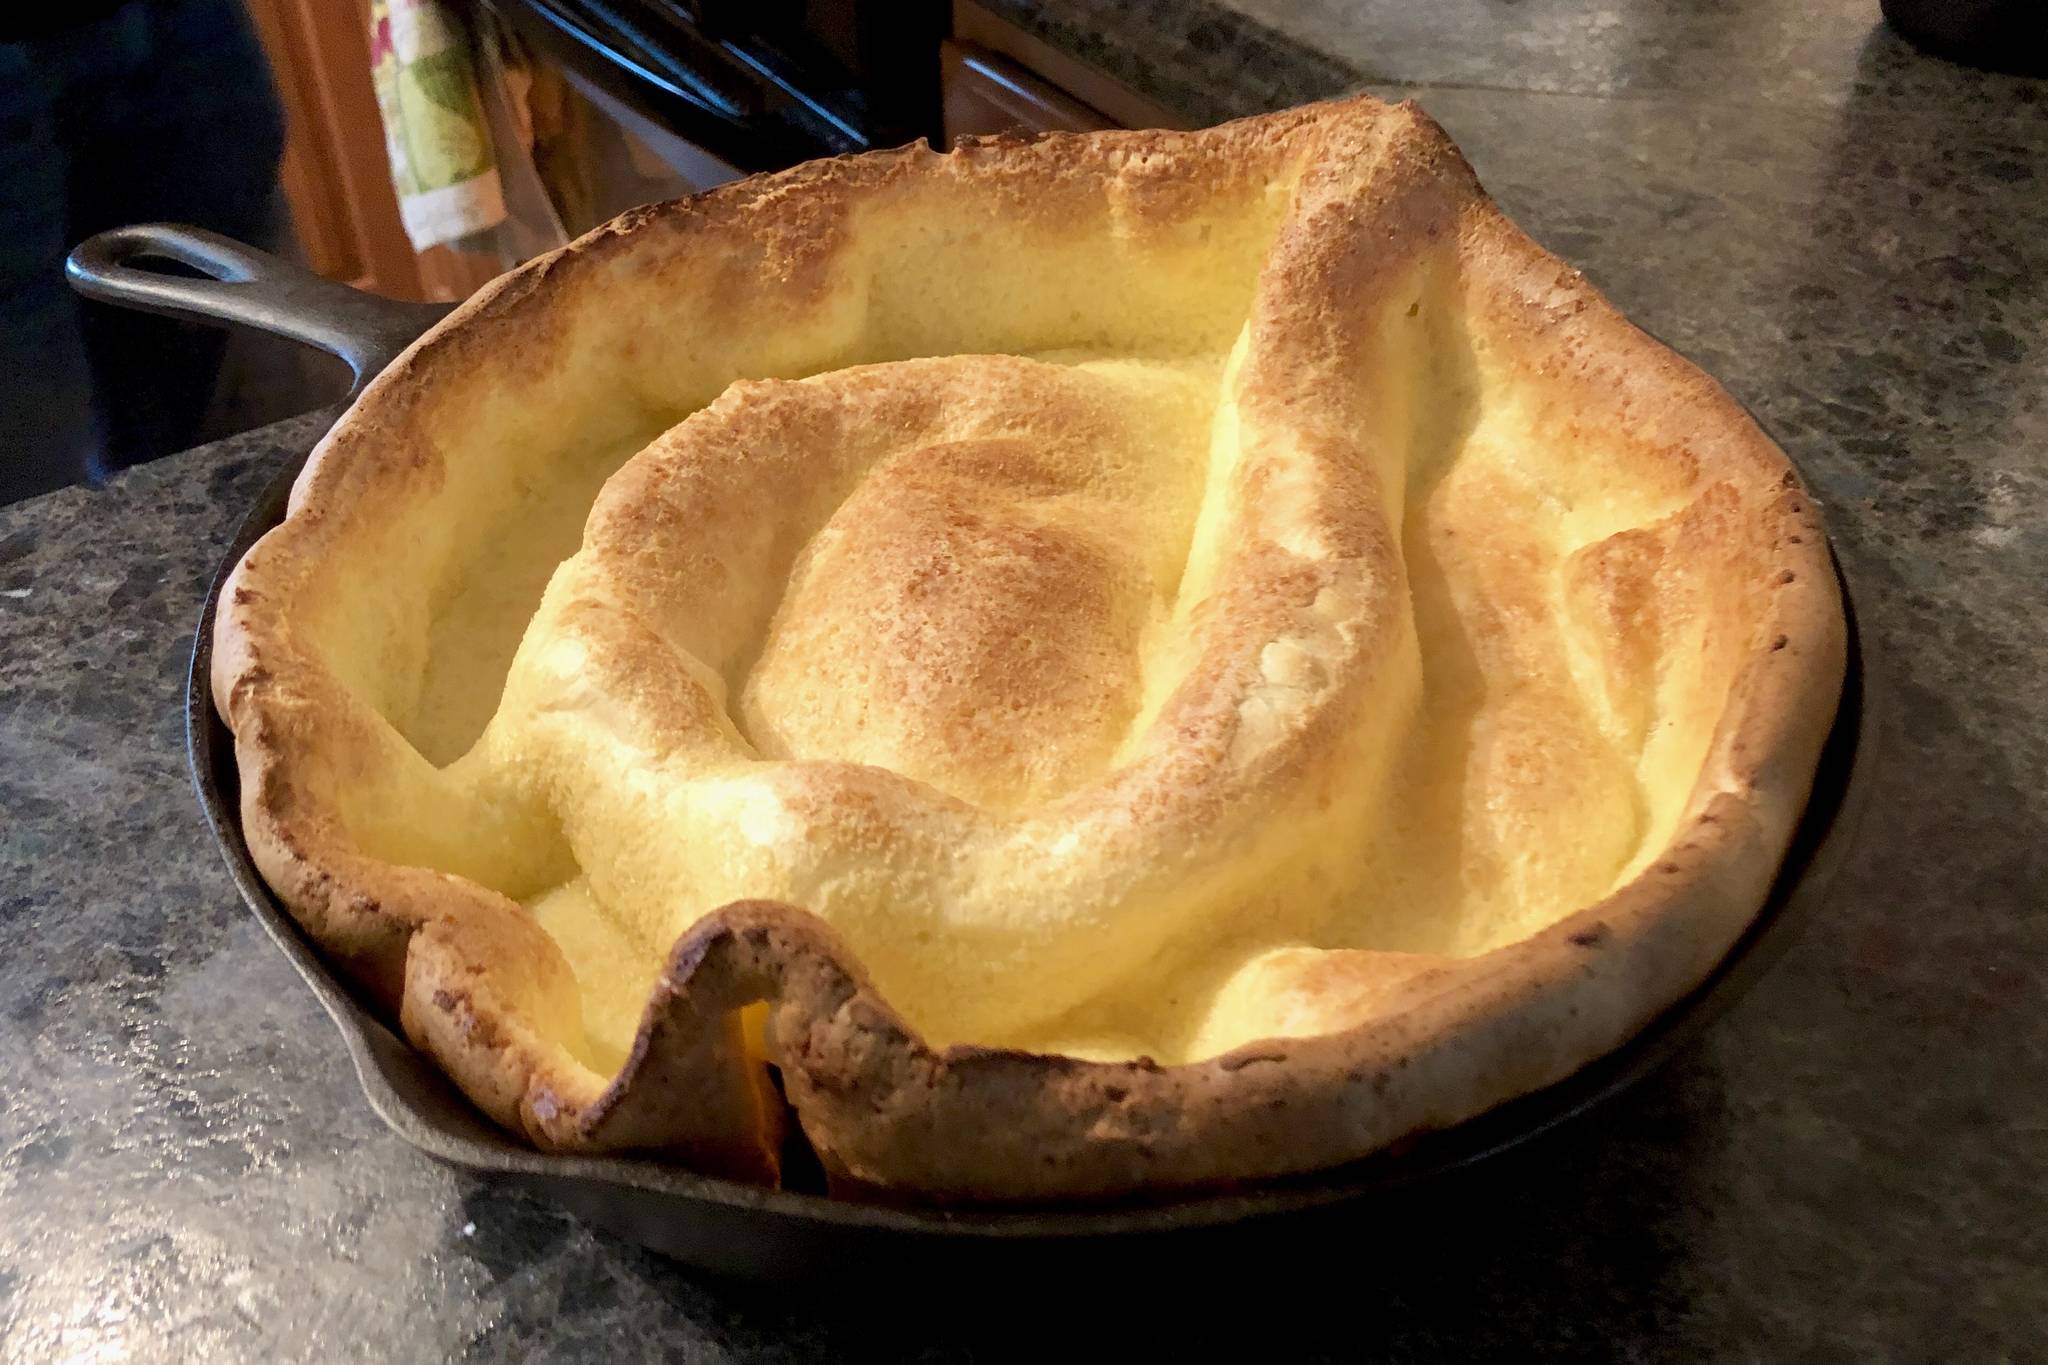 Dutch babies, golden, eggy, puffy pancakes most often baked in a cast-iron skillet, can be paired with sweet or savory ingredients. (Photo by Victoria Petersen/Peninsula Clarion)